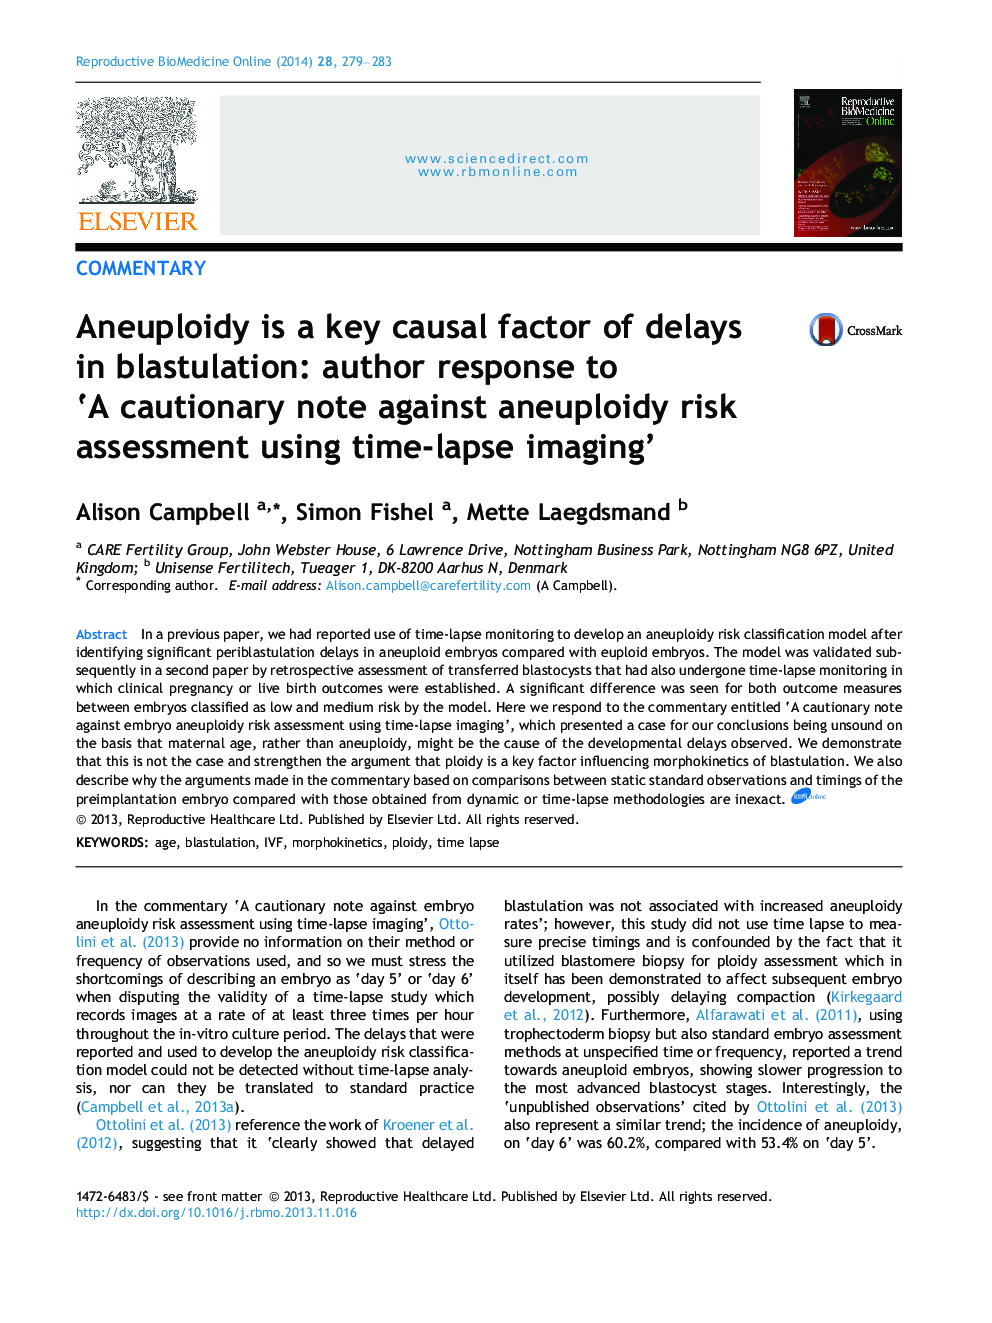 Aneuploidy is a key causal factor of delays in blastulation: author response to 'A cautionary note against aneuploidy risk assessment using time-lapse imaging'